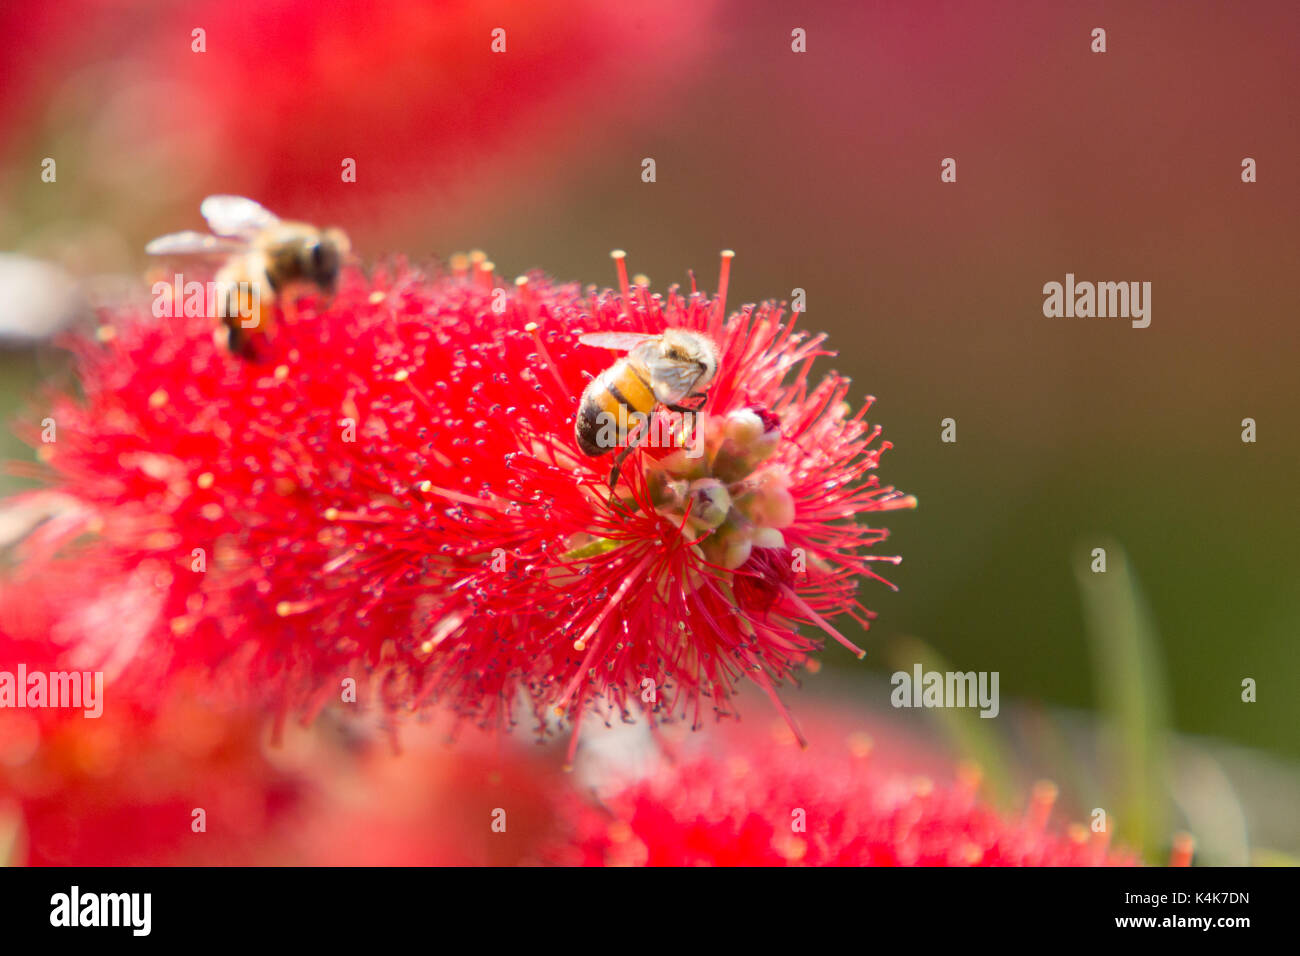 Asuncion, Paraguay. 6th Sep, 2017. Sunny day in Asuncion with temperatures high around 30°C as honey bees (Apis mellifera) collect nectar from weeping bottlebrush (Melaleuca viminalis) flowers while they bloom throughout the winter sunshine. Credit: Andre M. Chang/ARDUOPRESS/Alamy Live News Stock Photo